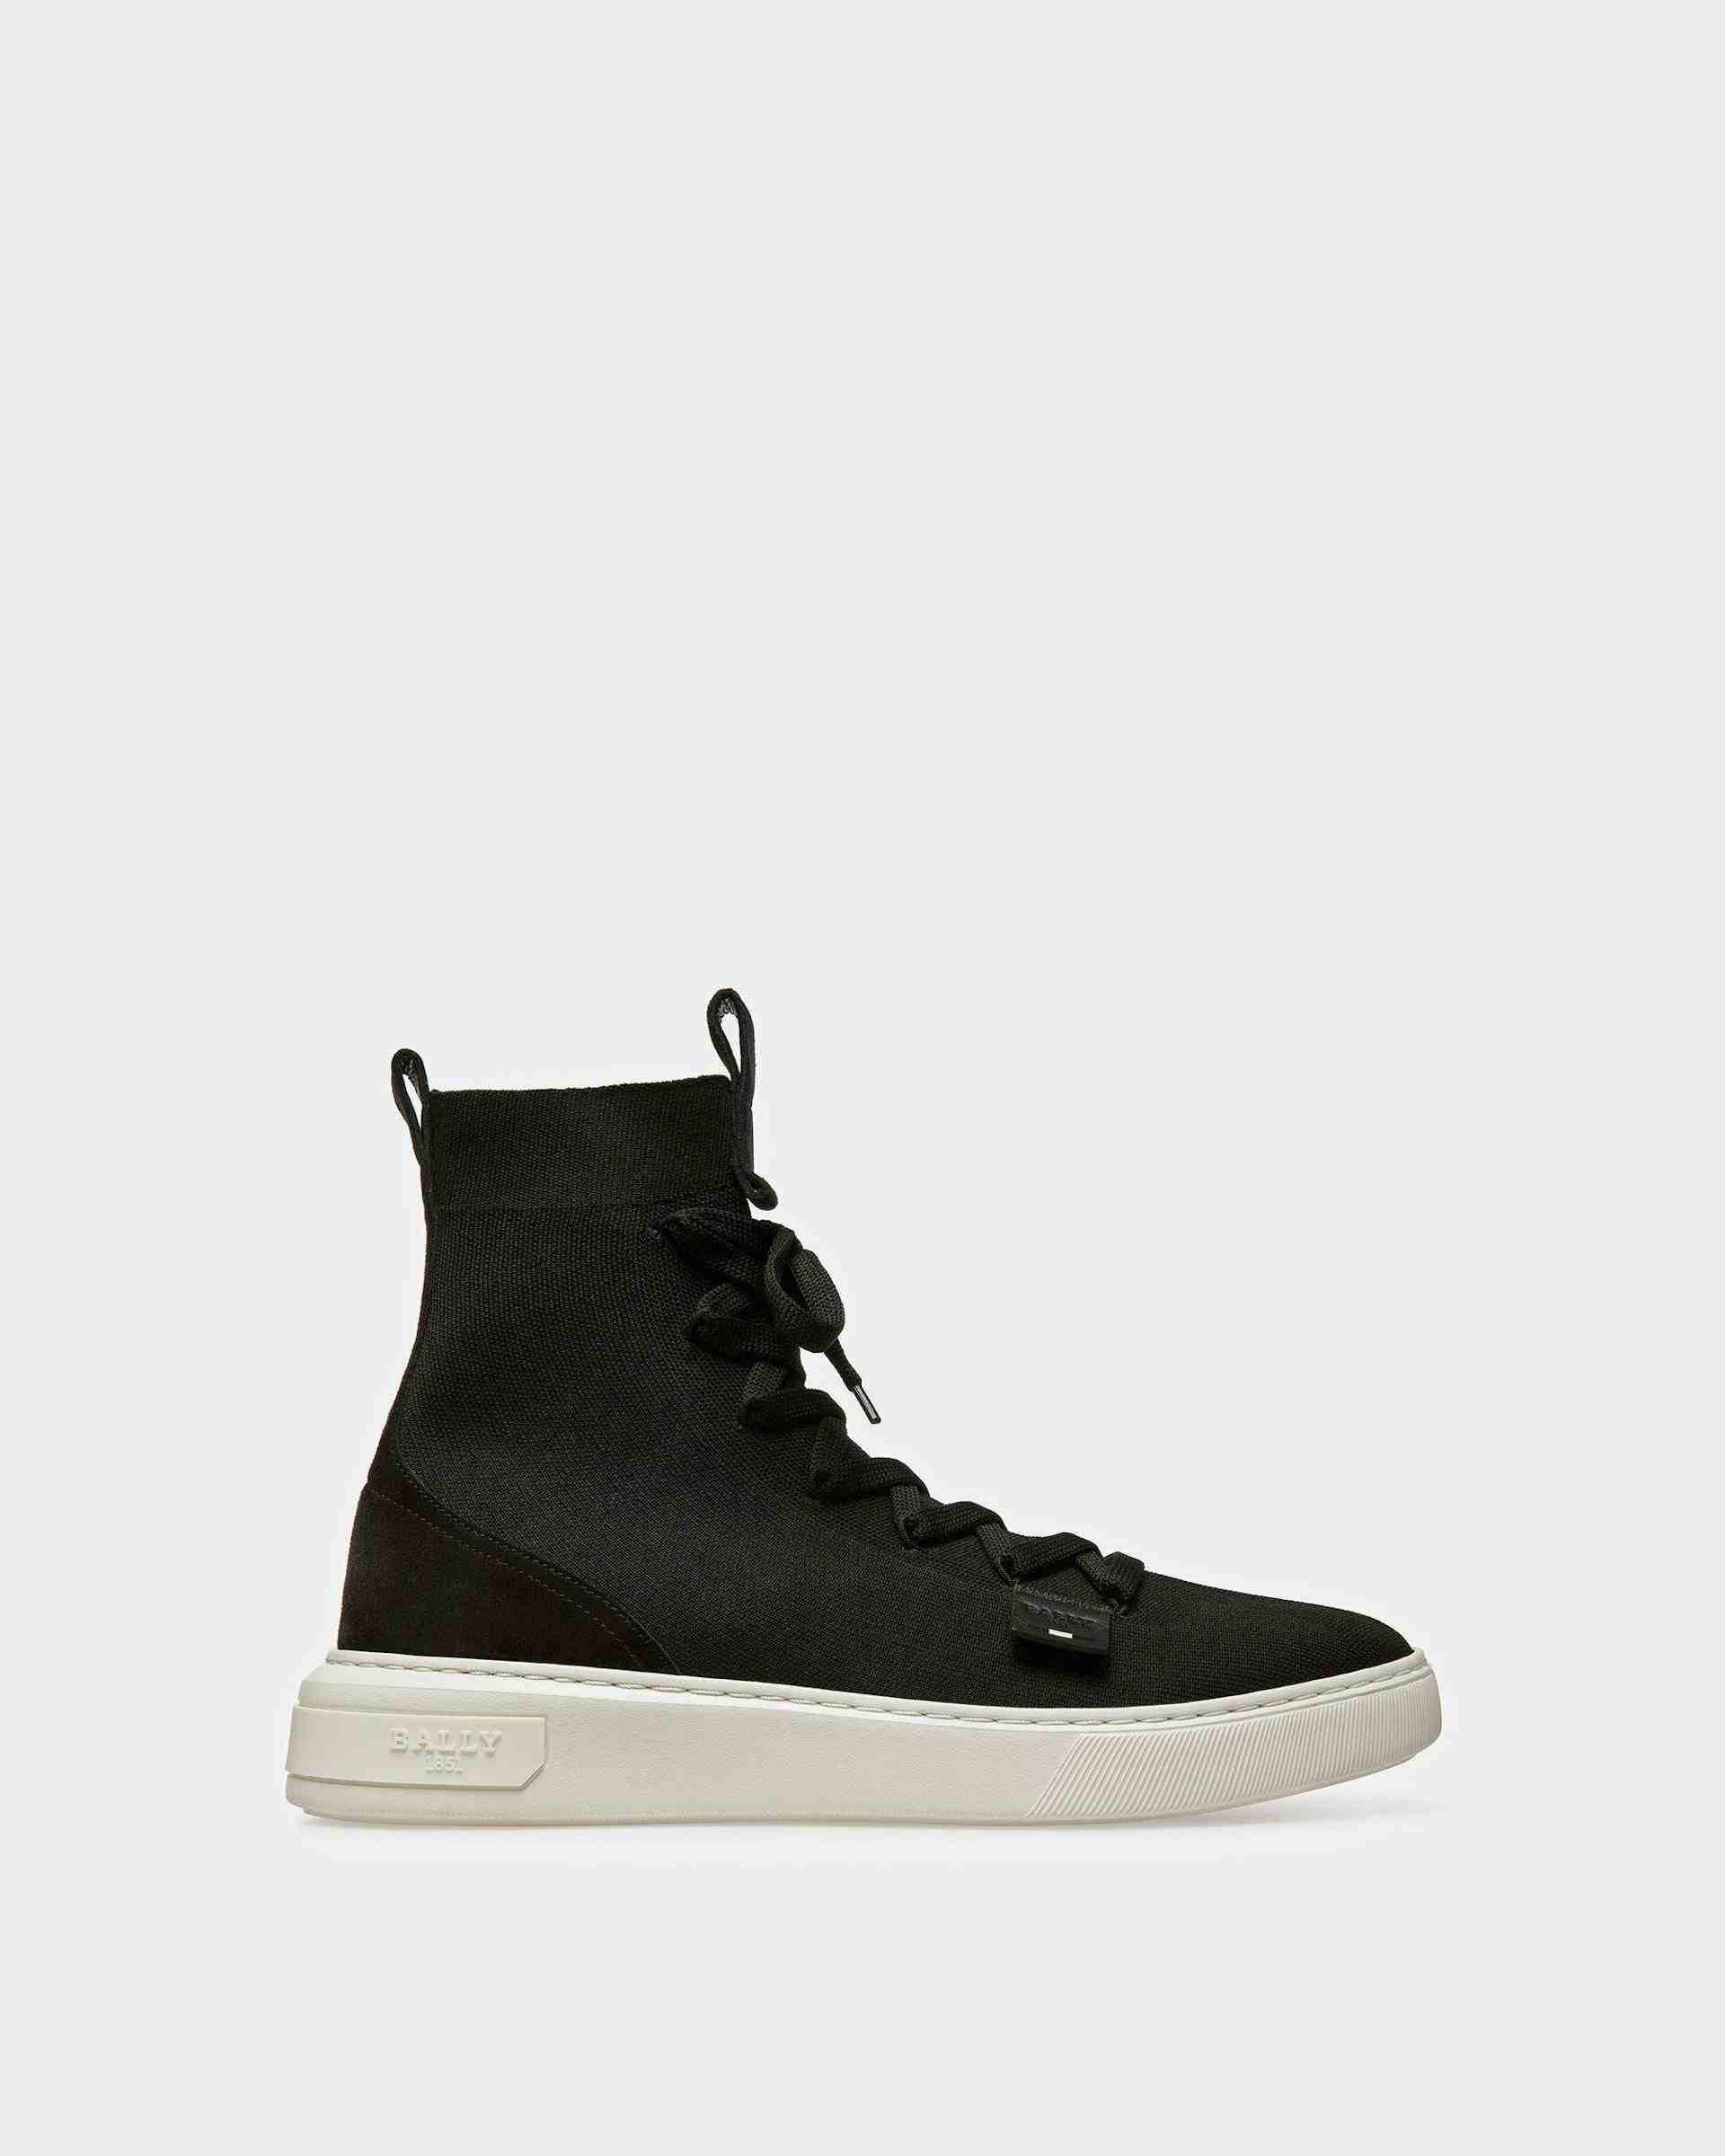 Mitys-T Leather Sneakers In Black - Men's - Bally